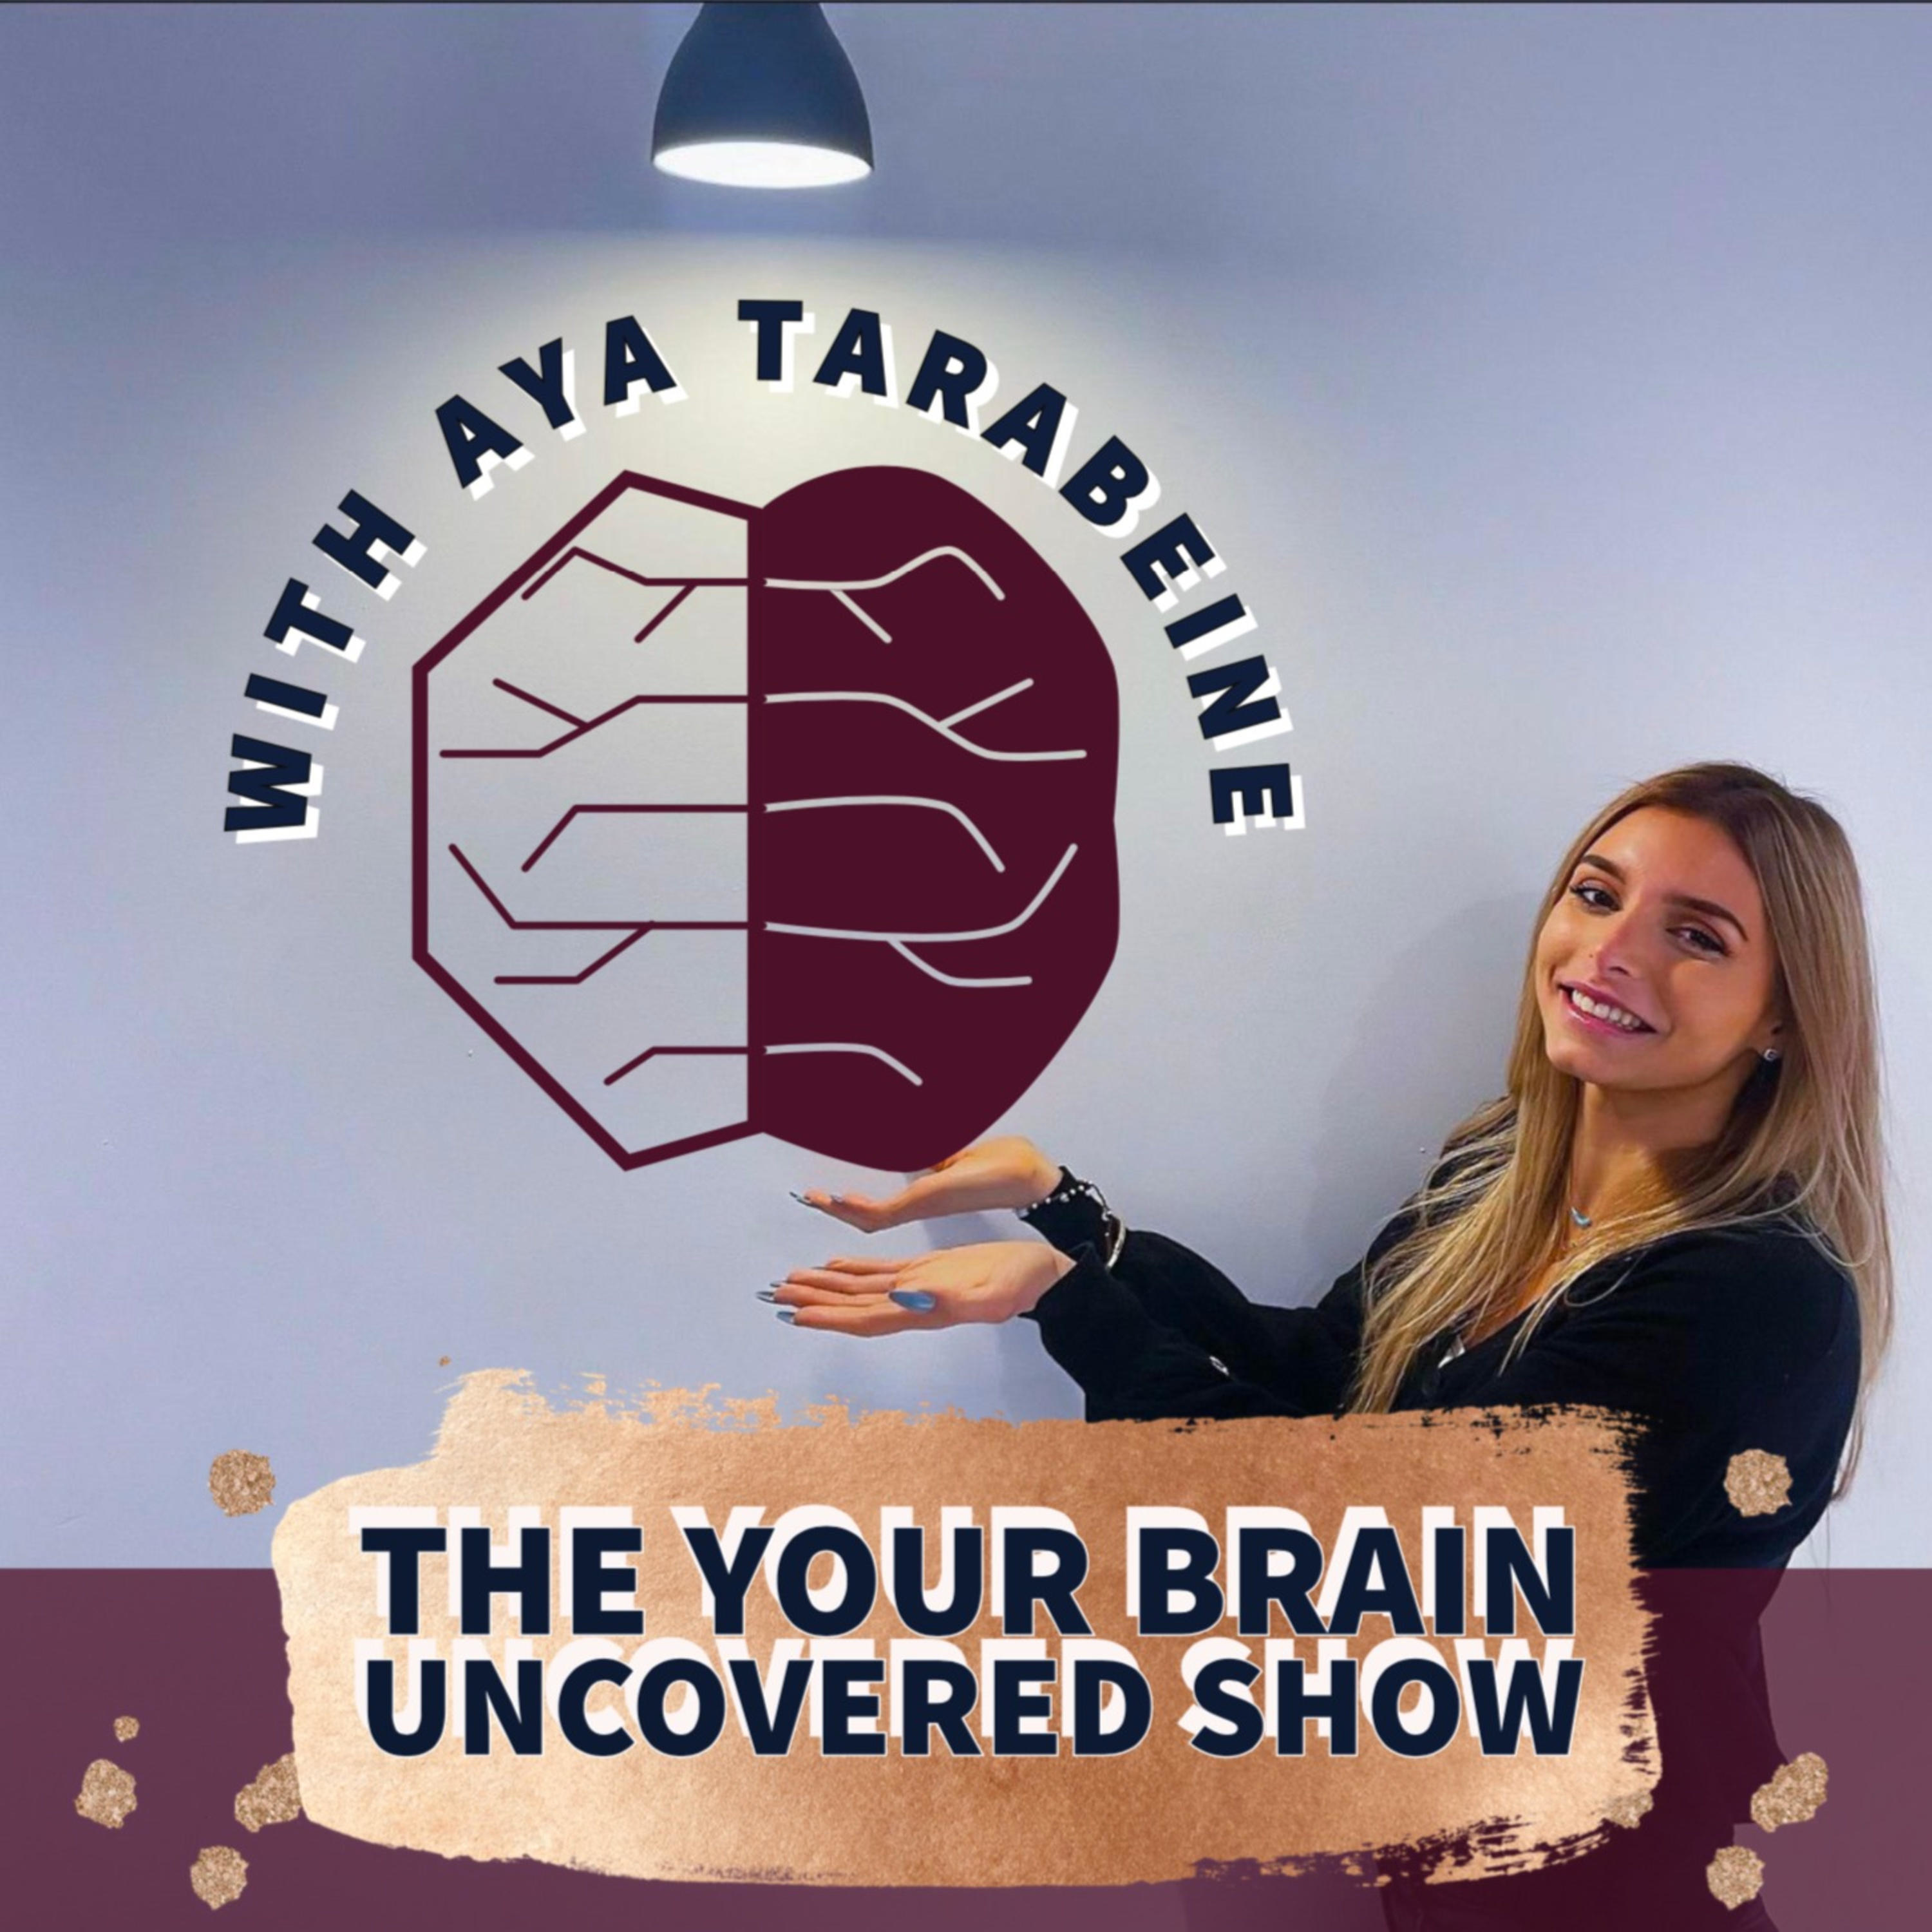 The Your Brain Uncovered Show with Aya Tarabeine